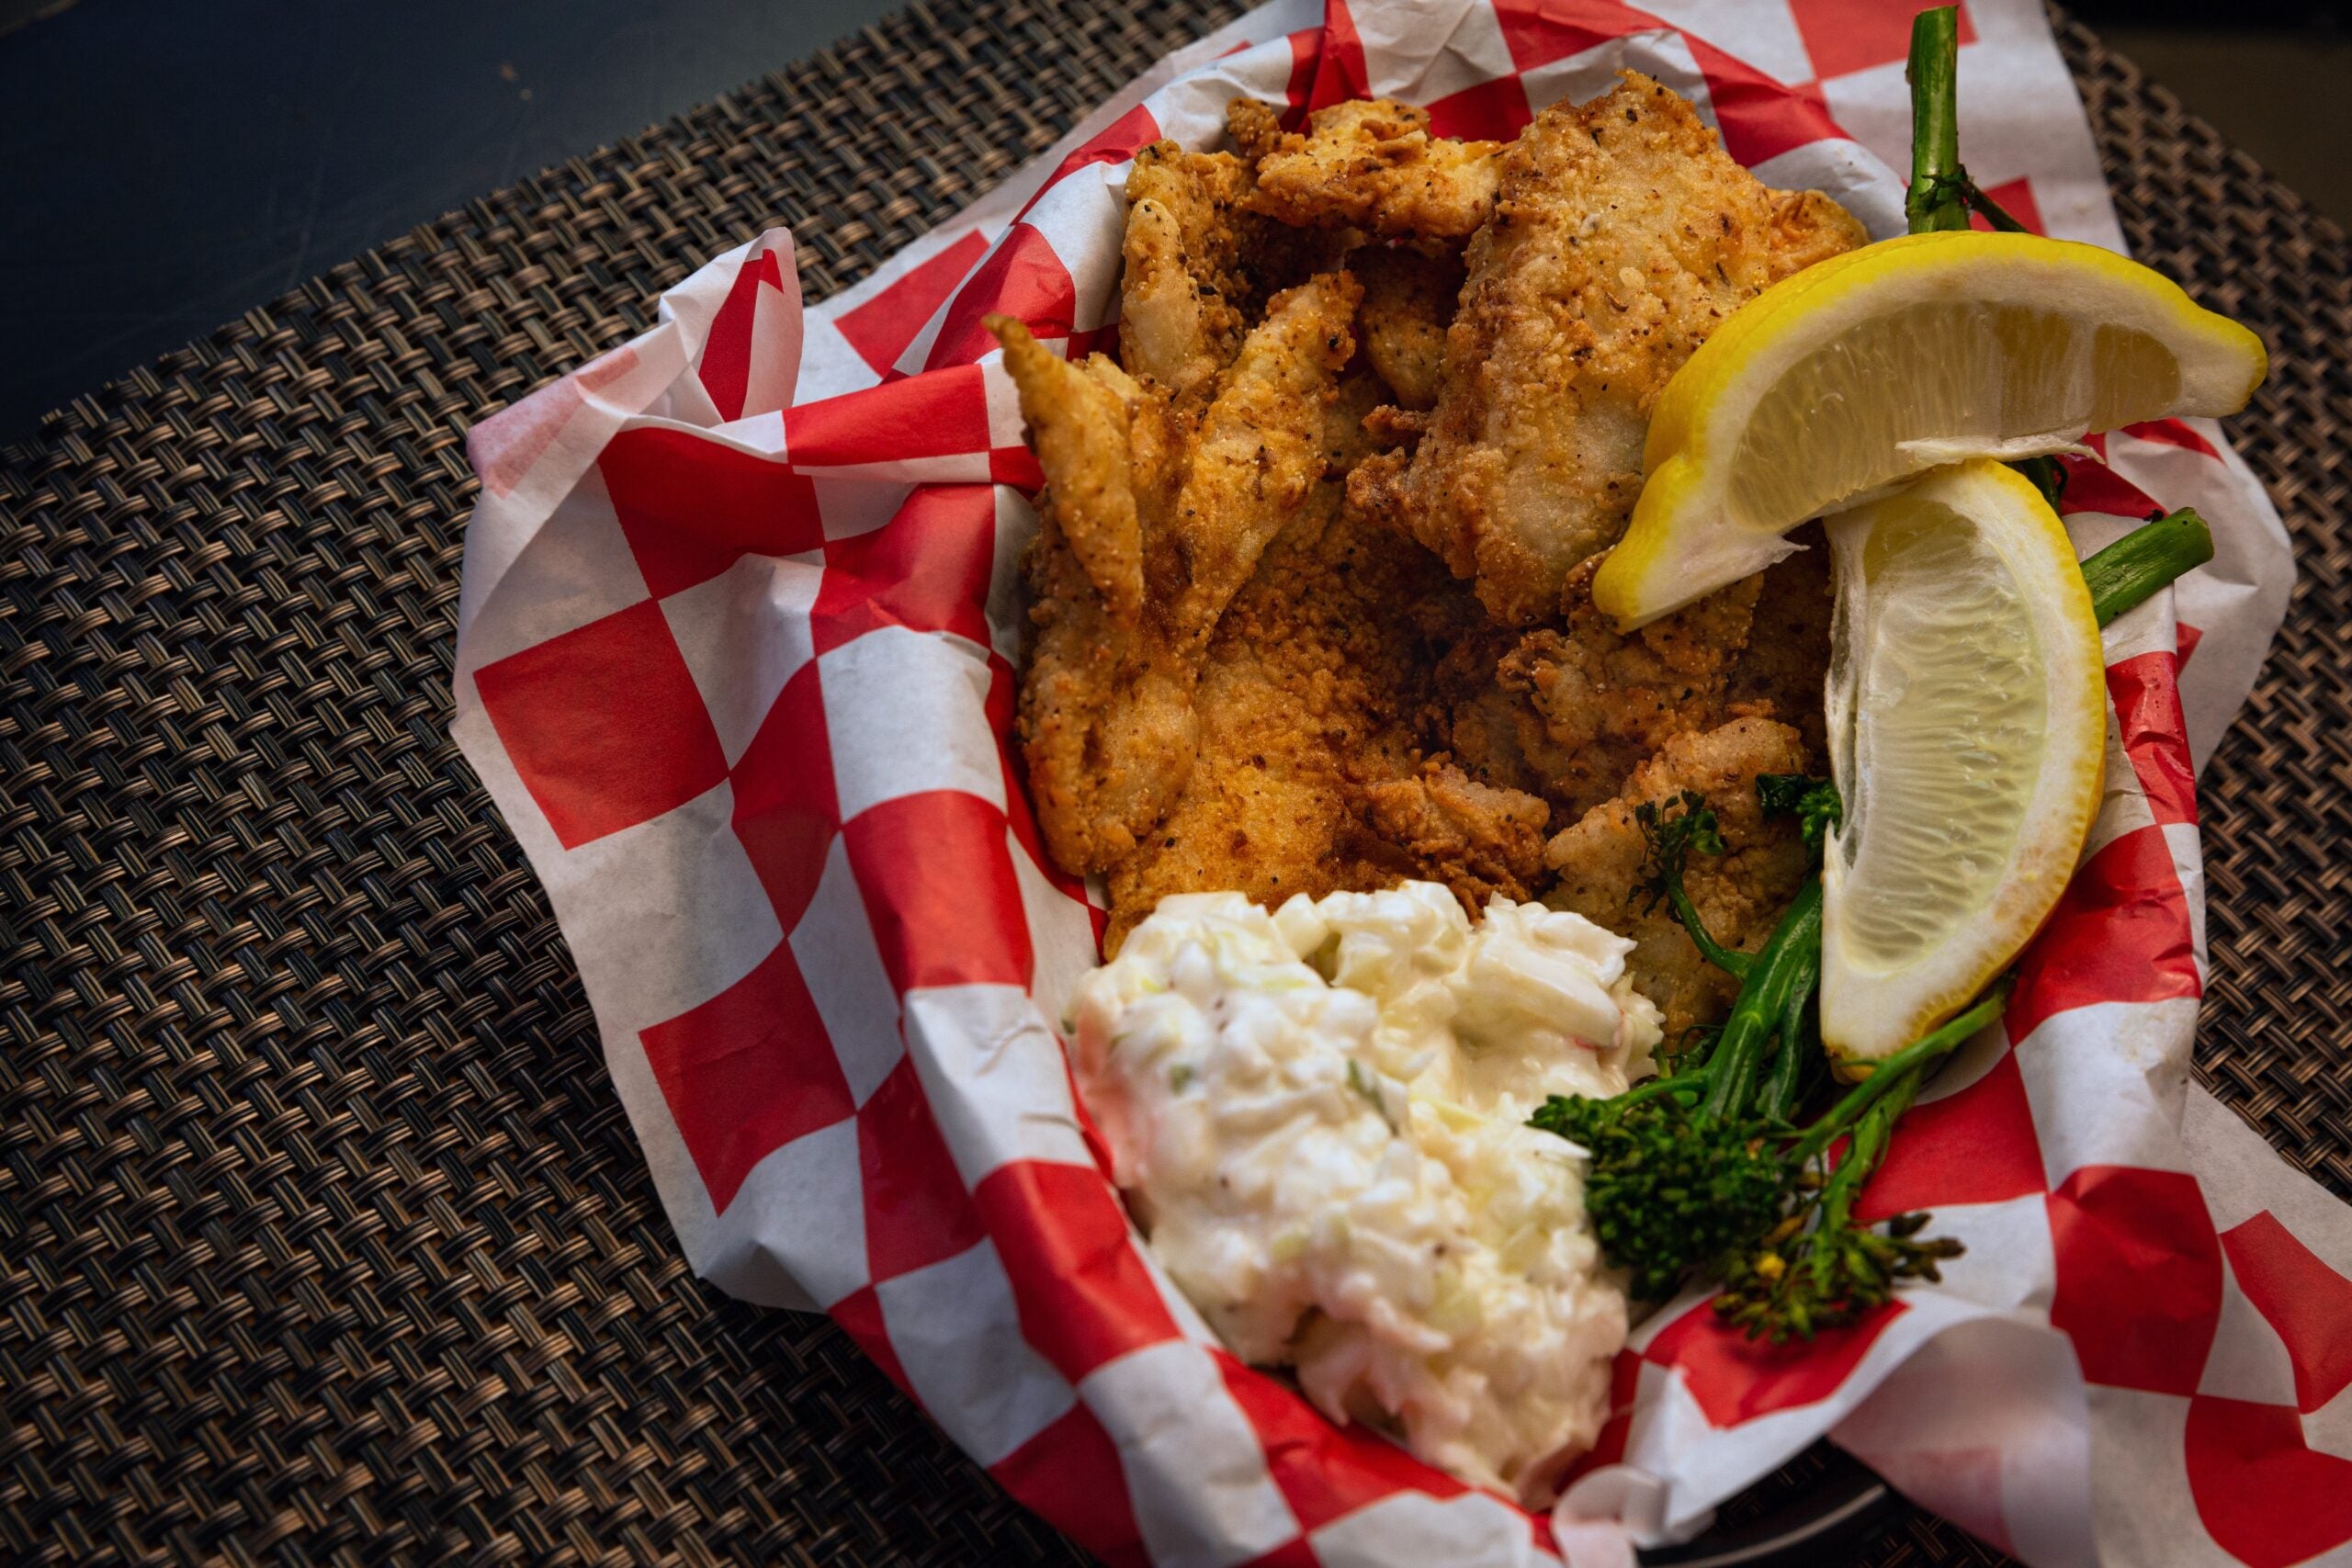 A basket of fried catfish with slaw and lemon wedges